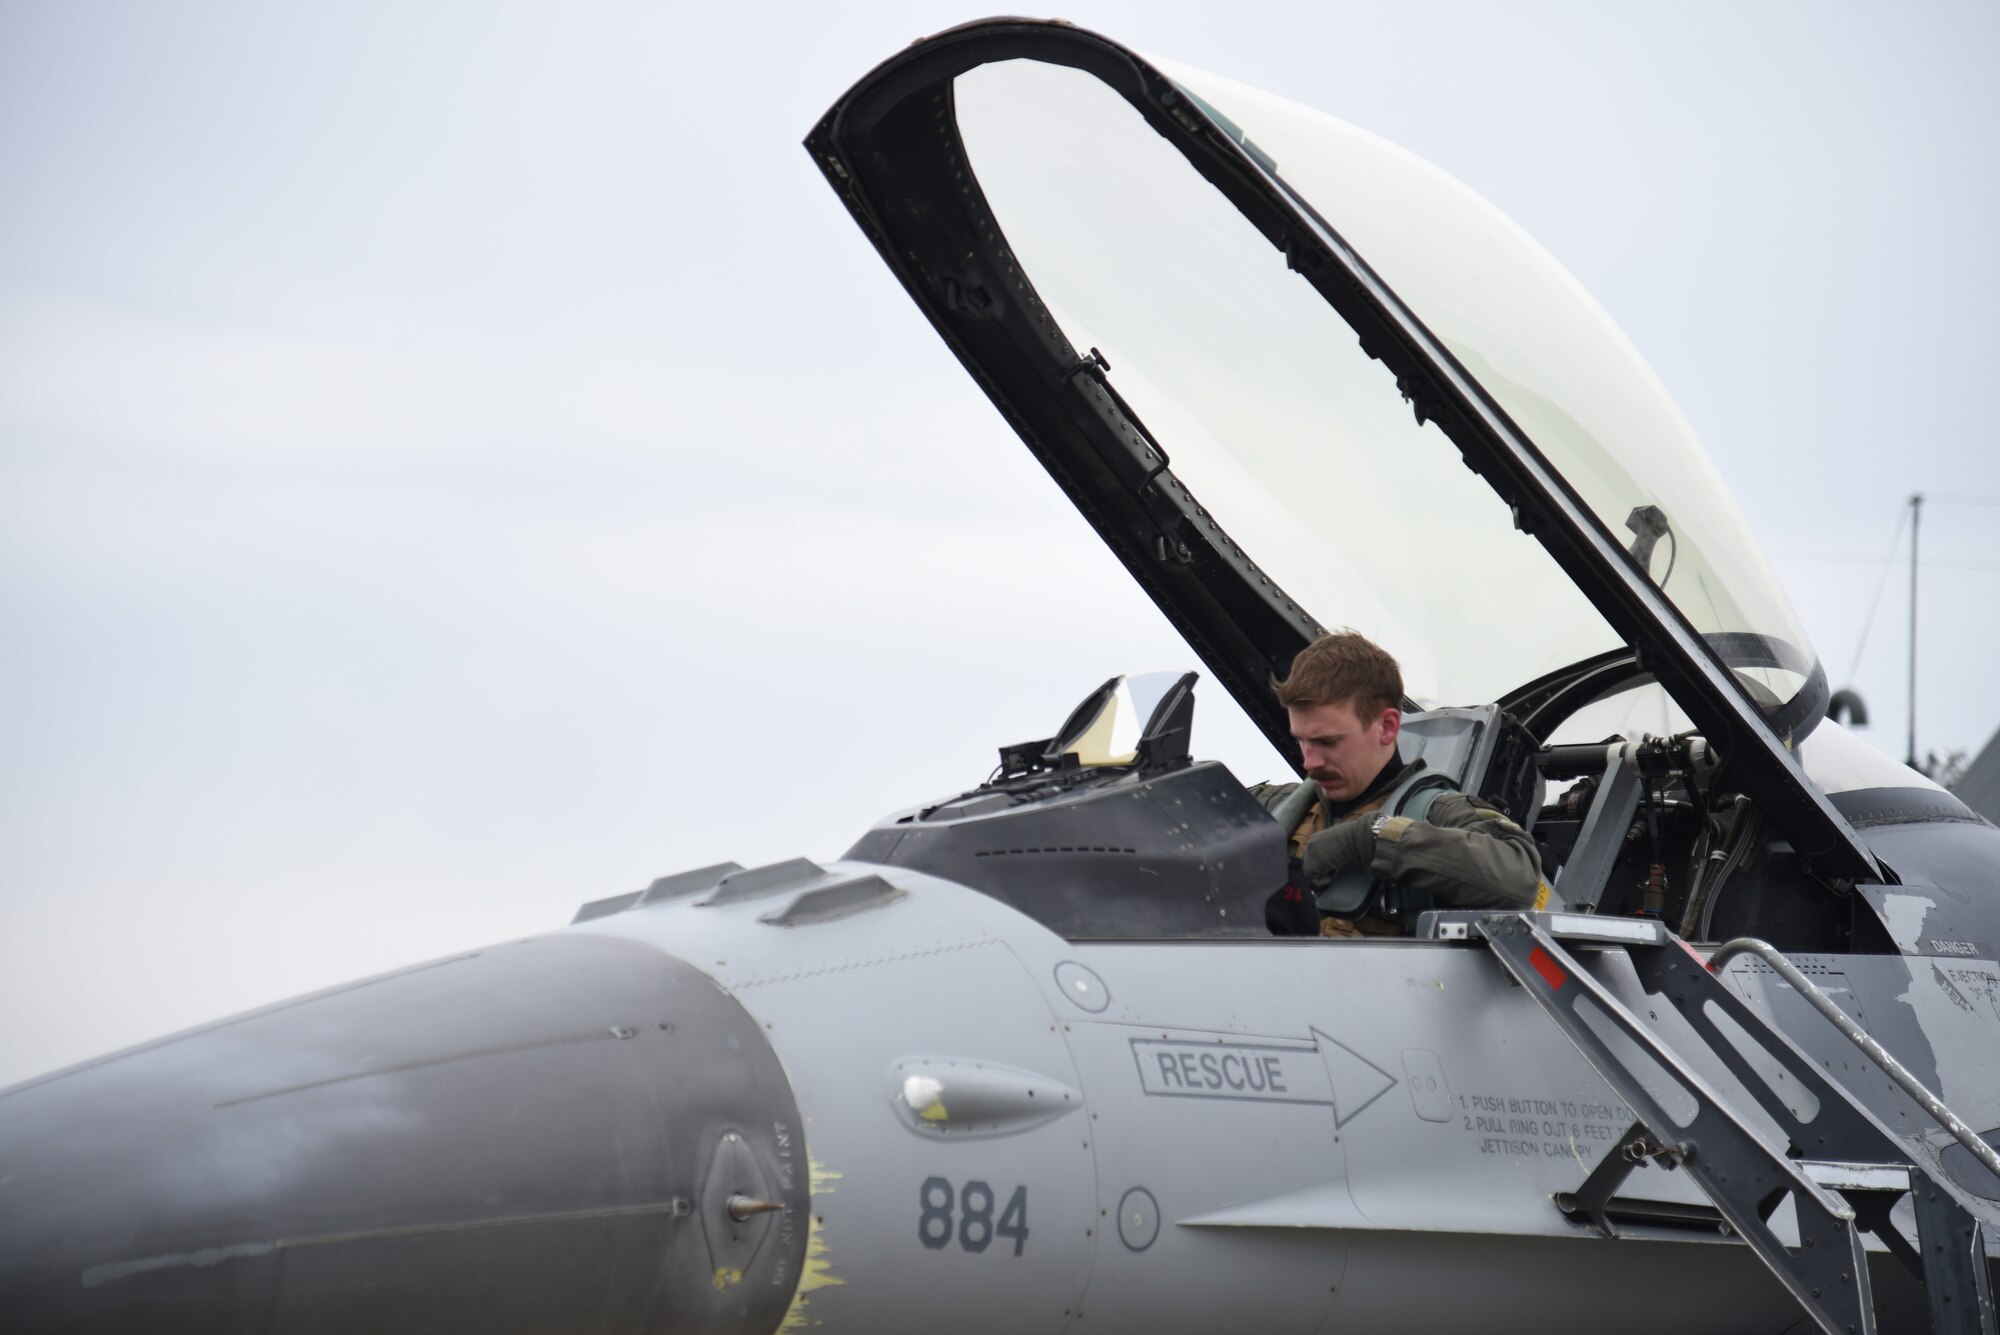 U.S. Air Force Captain Peter Magness, 13th Fighter Squadron electronic combat pilot, Misawa Air Base, Japan, prepares to exit his F-16 Fighting Falcon after Exercise PACIFIC WEASEL, Friday, March 27, 2020.  Each PAC WEASEL involves different assets and units. This exercise’s iteration included F-16s from the 13th and 14th Fighter Squadrons, command and control assets assigned to the 610th Air Control Flight, and surface-to-air missile simulators from the Japanese Ground Self Defense Force 101st Antiaircraft Artillery Unit from Camp Hachinohe.  (U.S. Air Force photo by Tech. Sgt. Chris Jacobs)